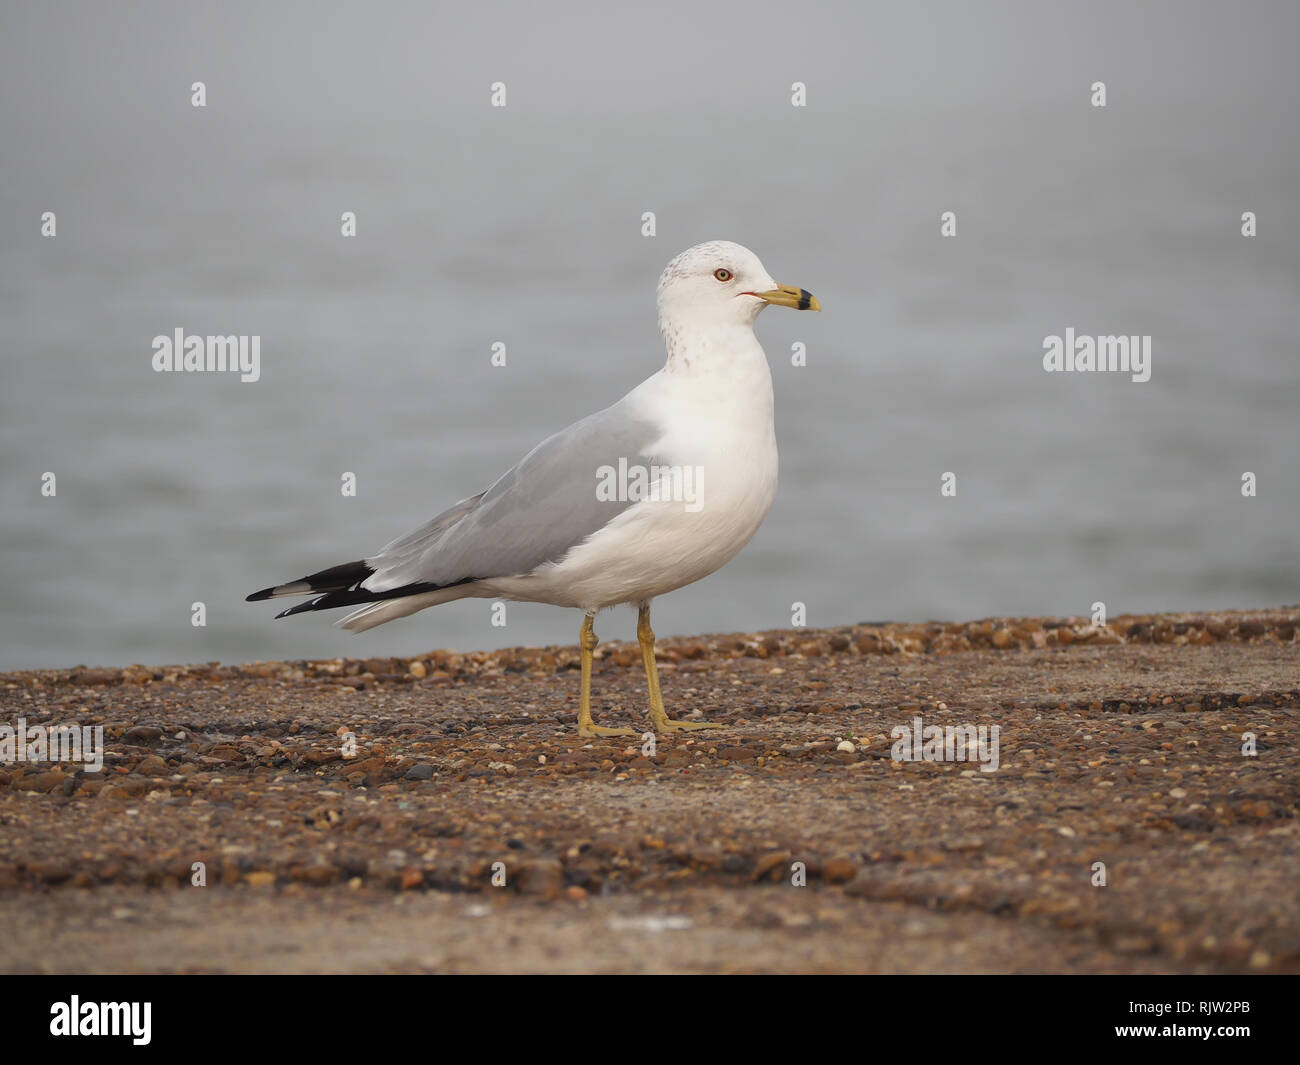 A Ring-billed Gull stands on the south jetty on a foggy day in Port Aransas, Texas USA. Stock Photo